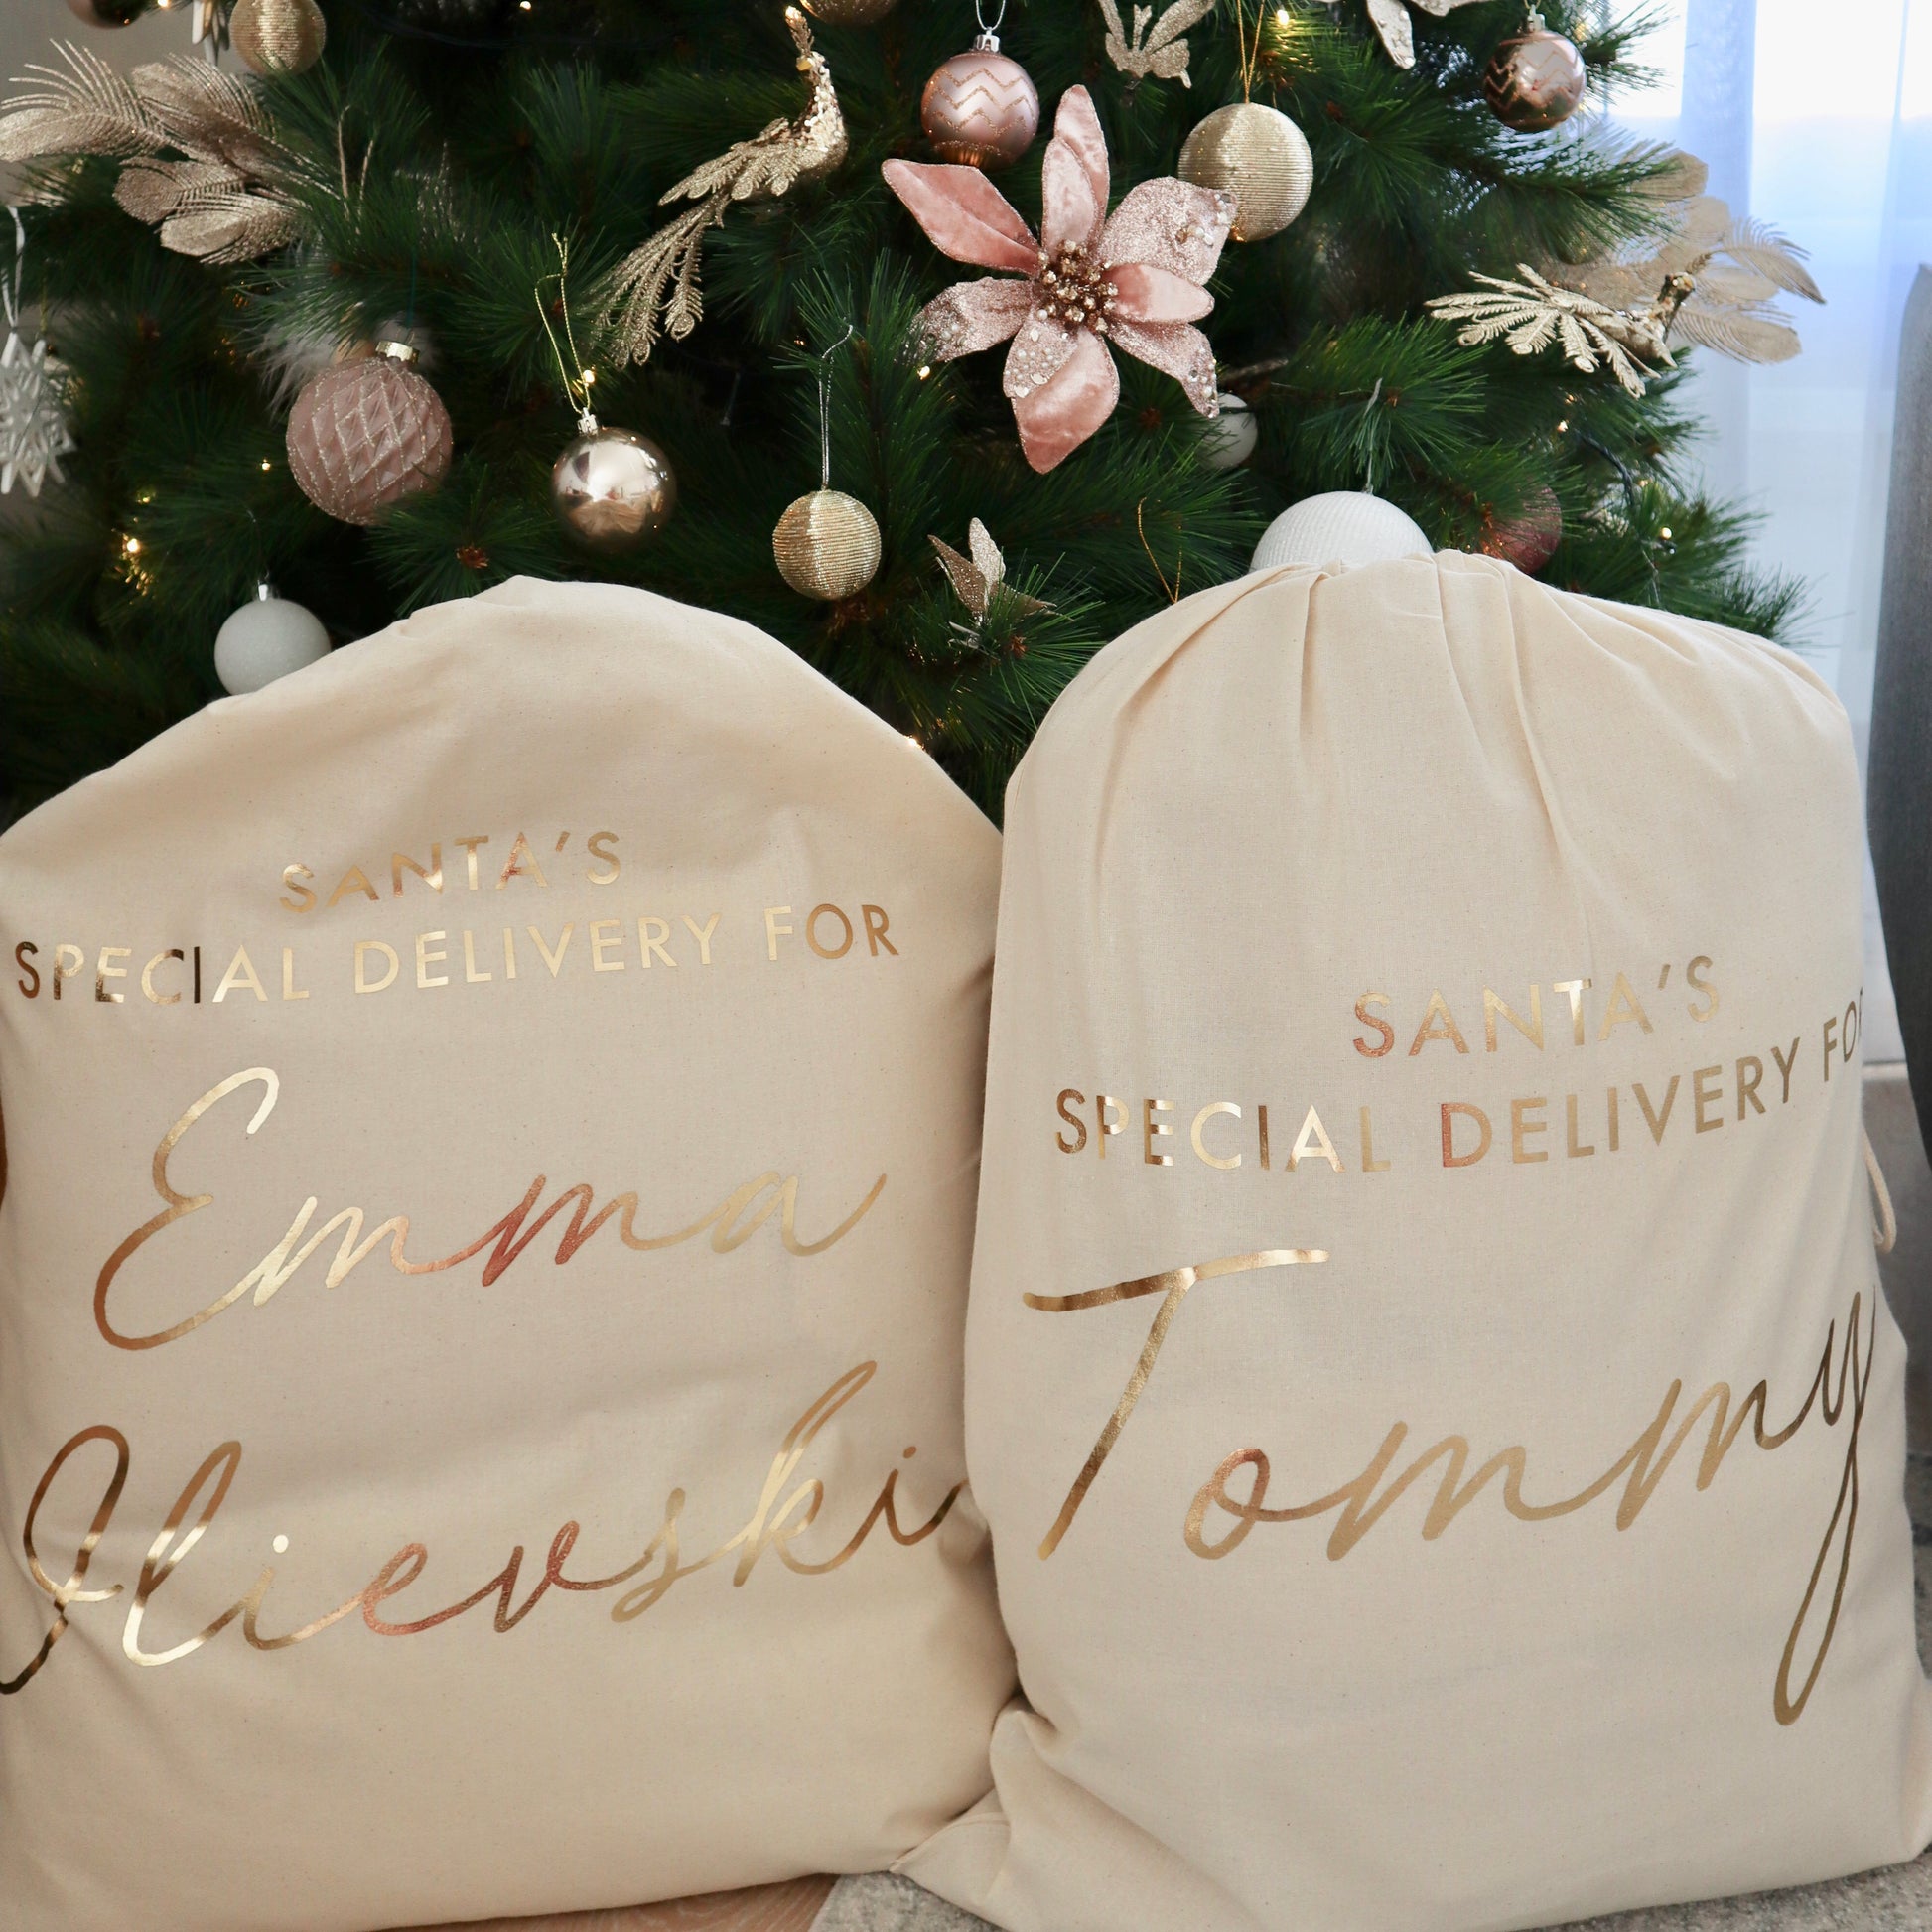 These personalised Santa sacks are perfect as a keepsake for your own children for Santa to deliver their gifts in, as well as gifting to the special little ones in your life.